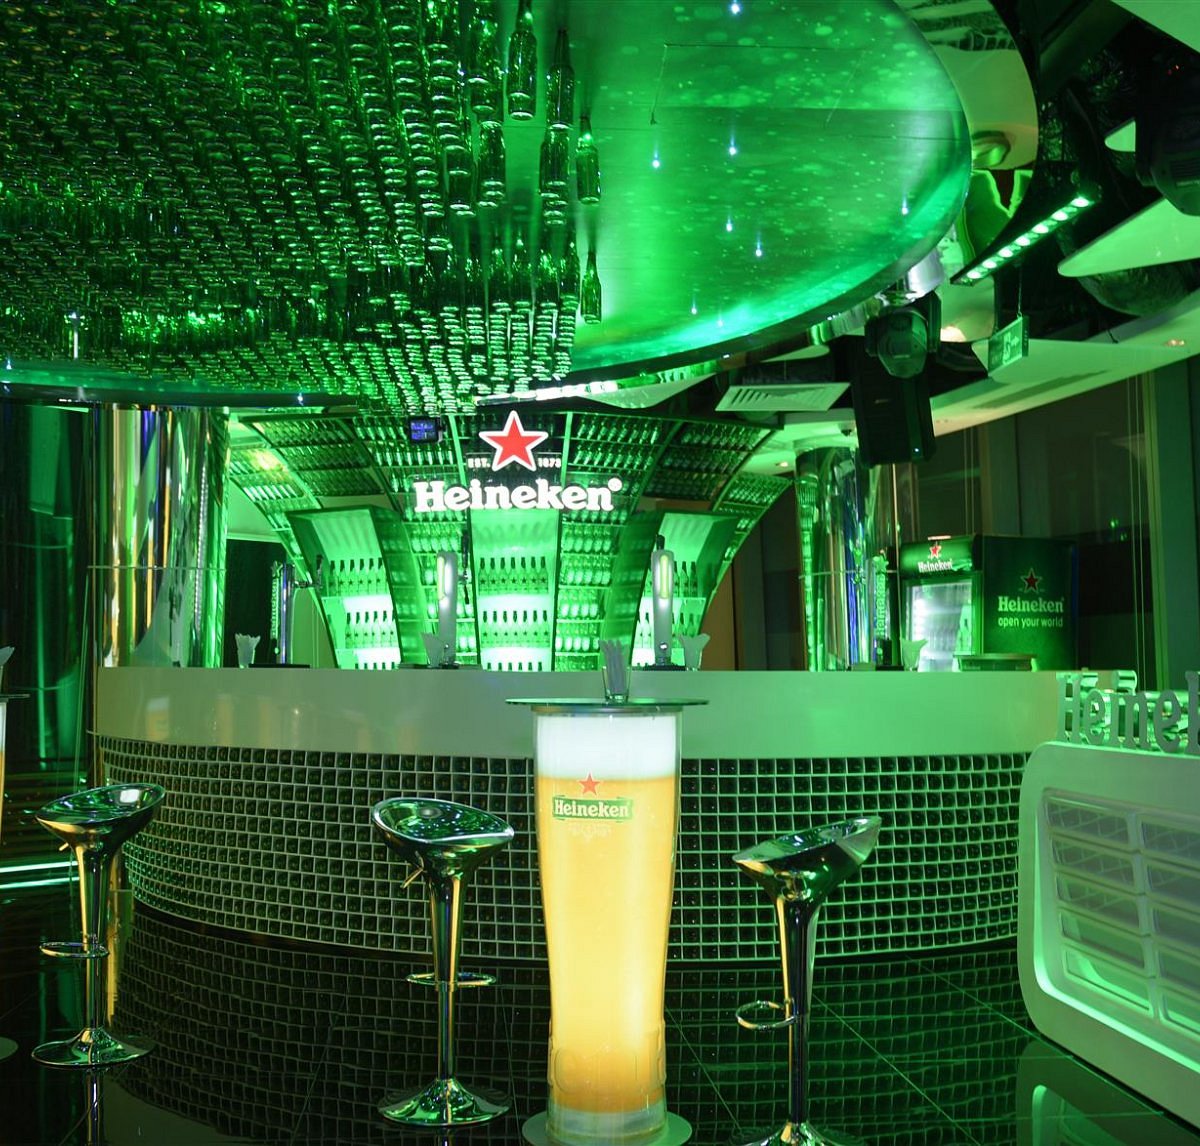 The World of Heineken - All You Need to Know BEFORE You Go (with Photos)